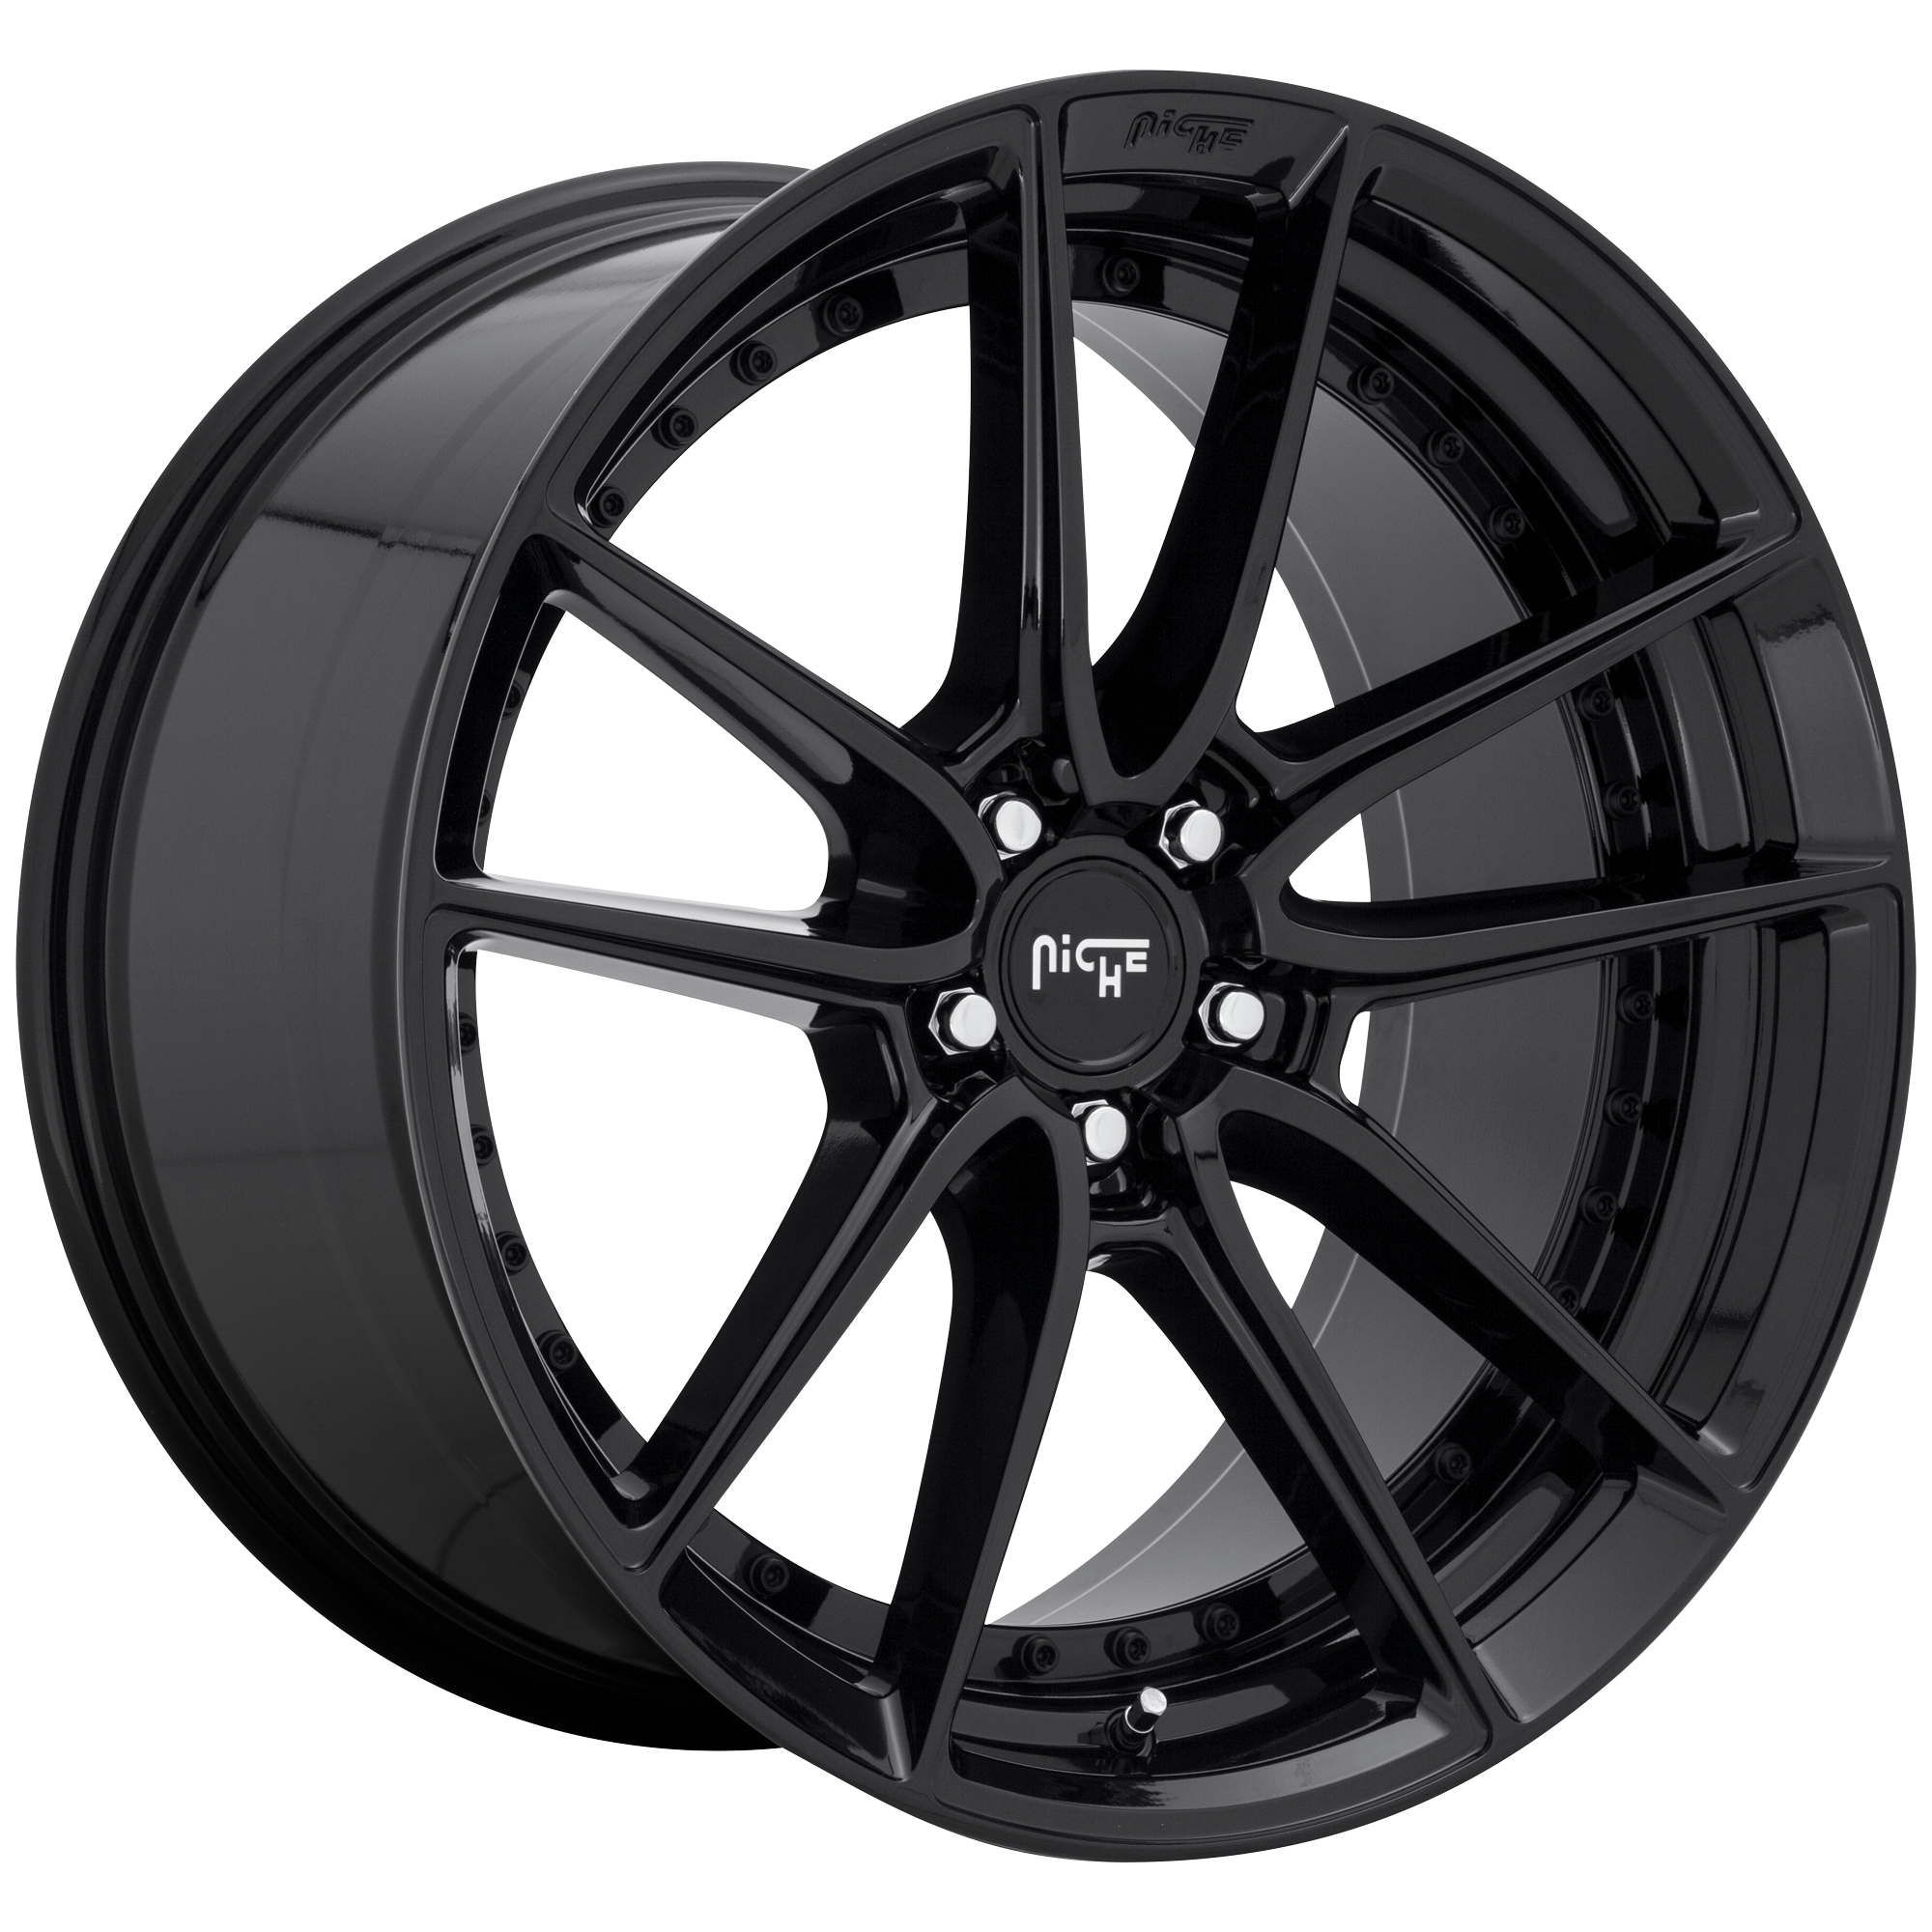 DFS 19x9.5 5x114.30 GLOSS BLACK (35 mm) - Tires and Engine Performance